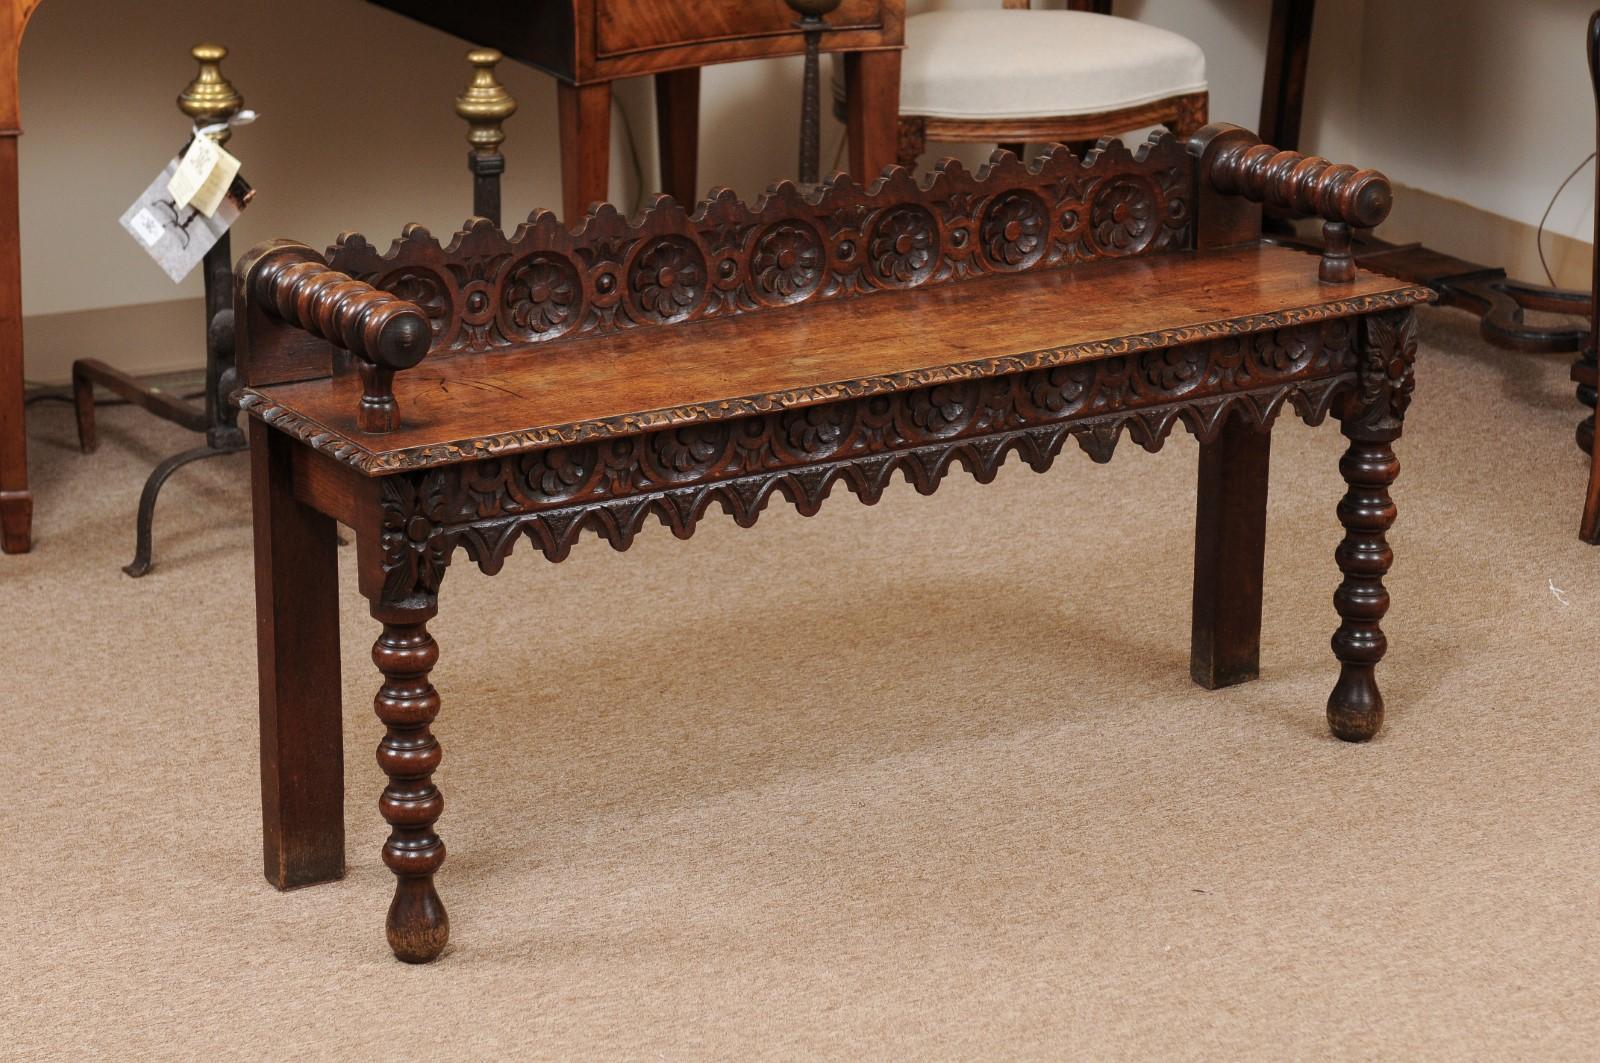 Late 19th century English oak hall bench featuring carved shaped back rail and apron with foliage carving and bobbin turned arms and front legs.